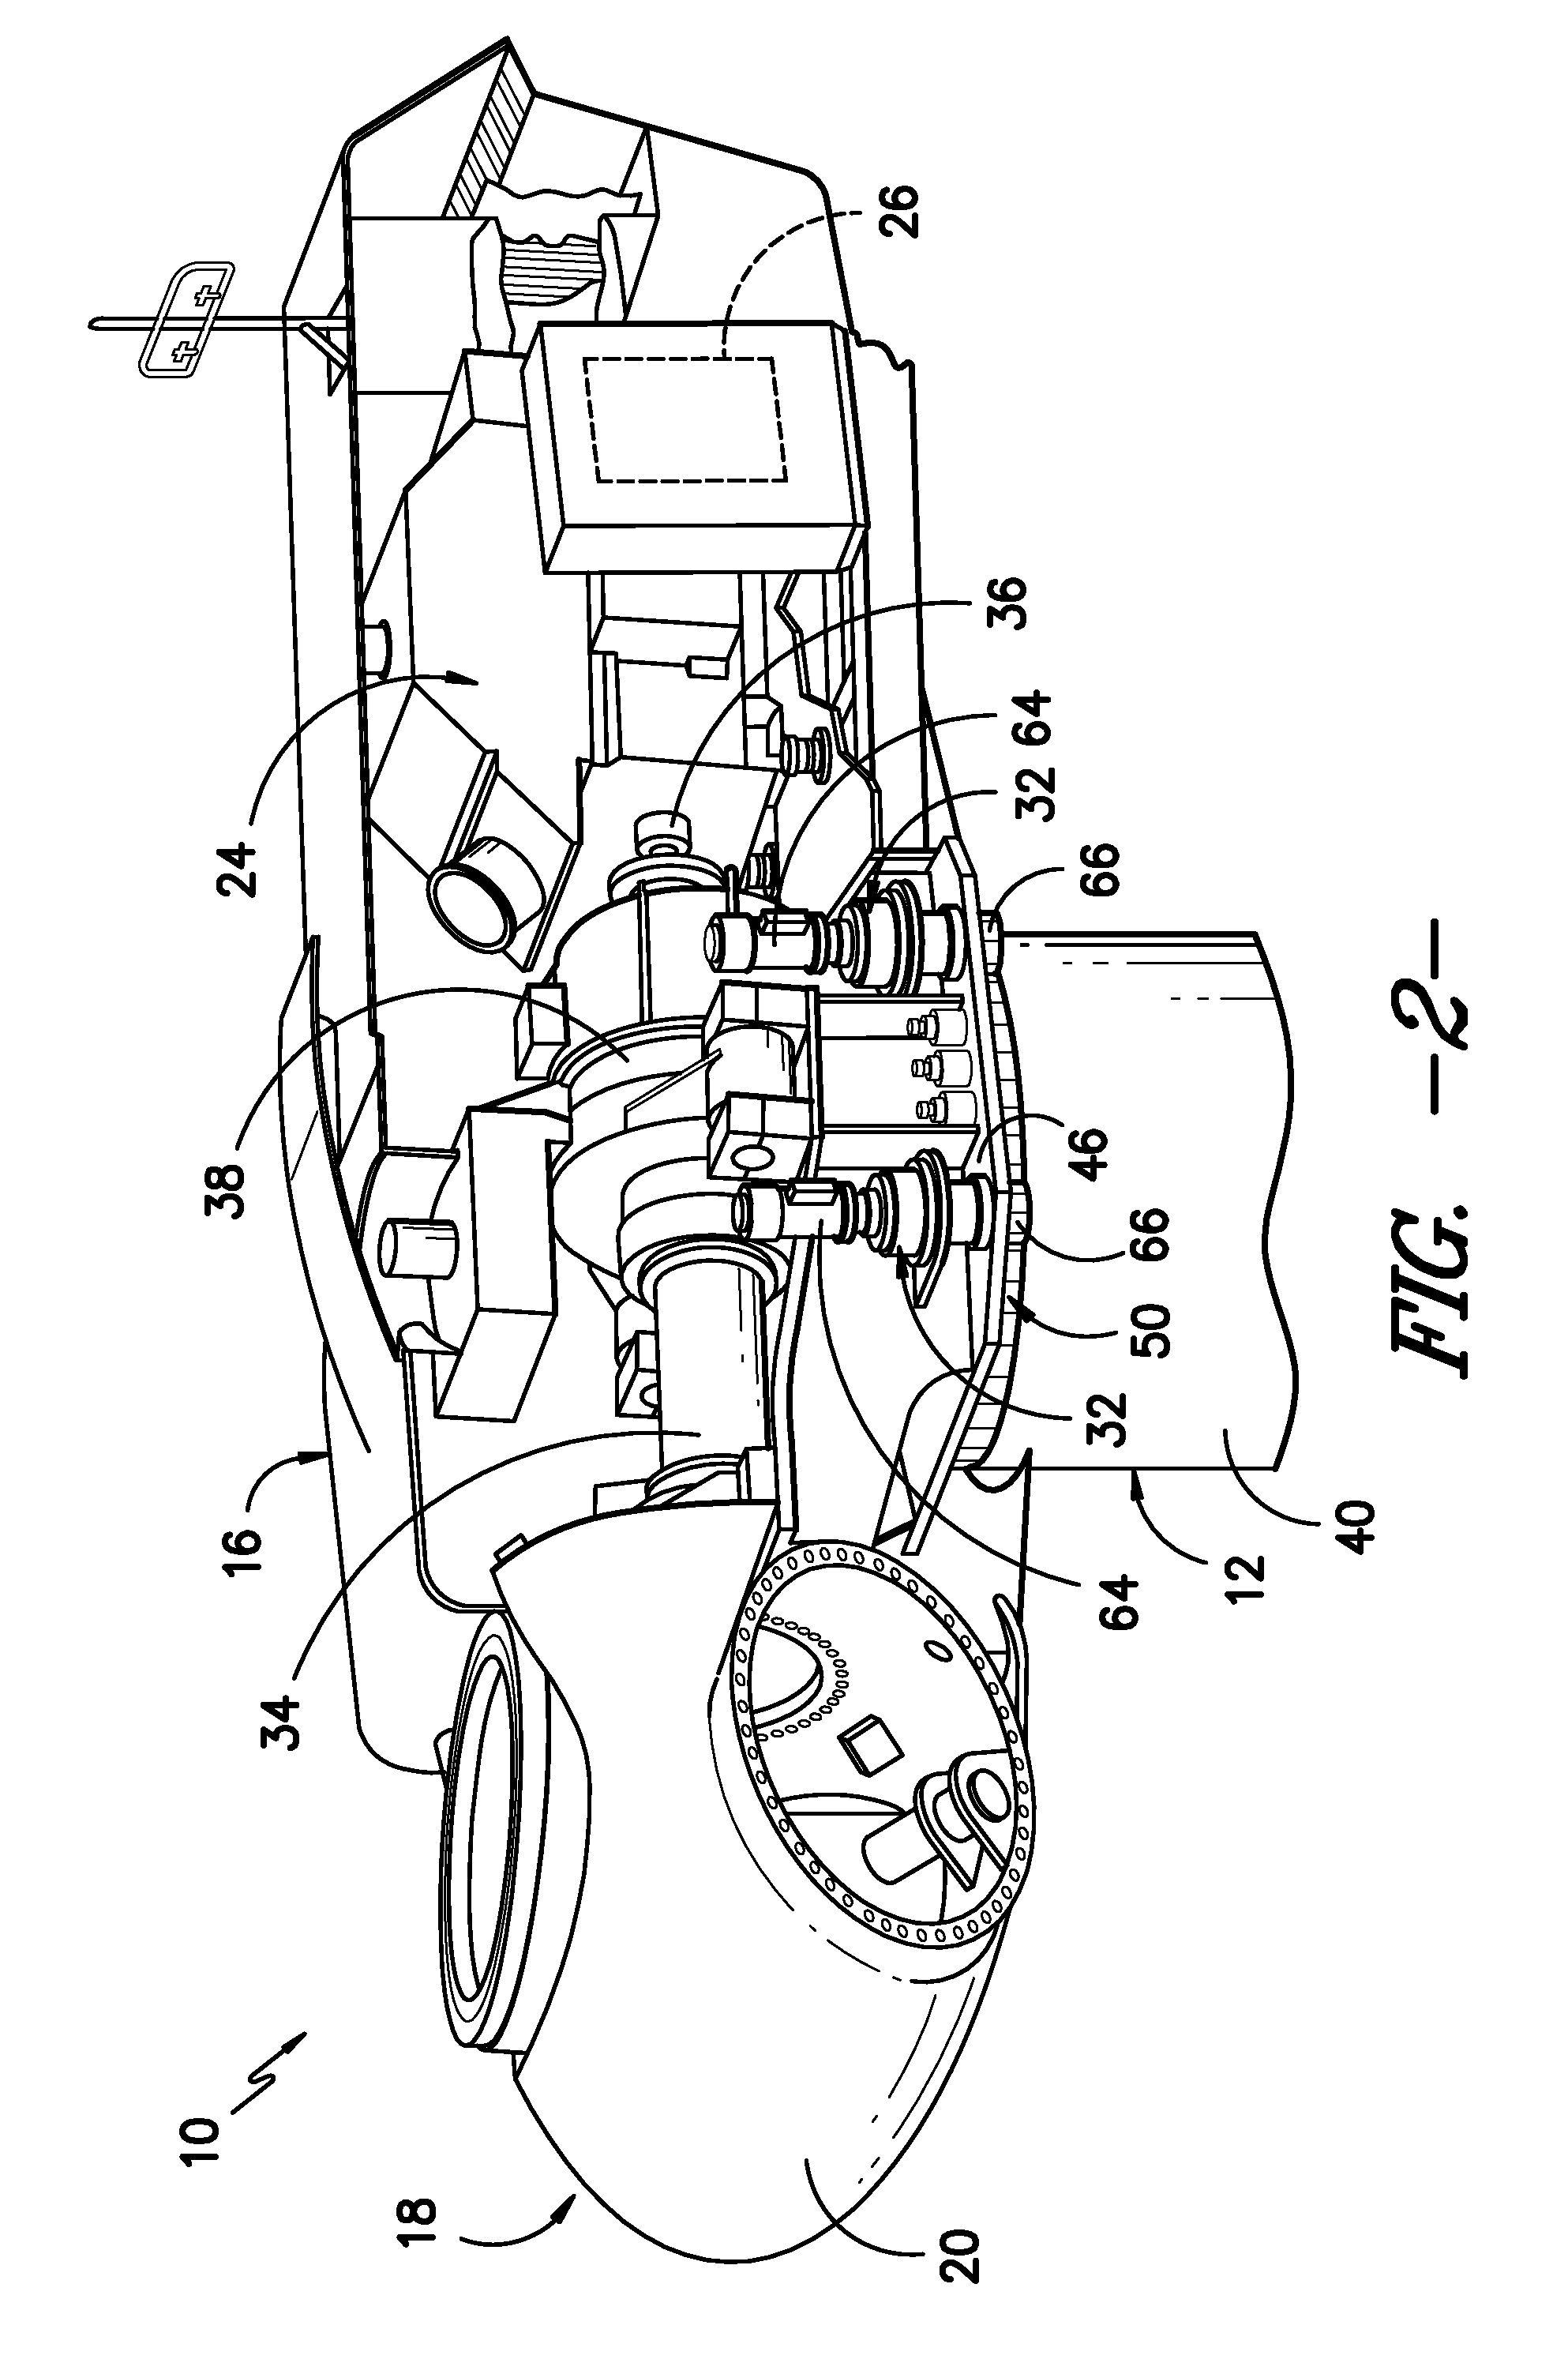 Yaw bearing assembly and tower for wind turbine